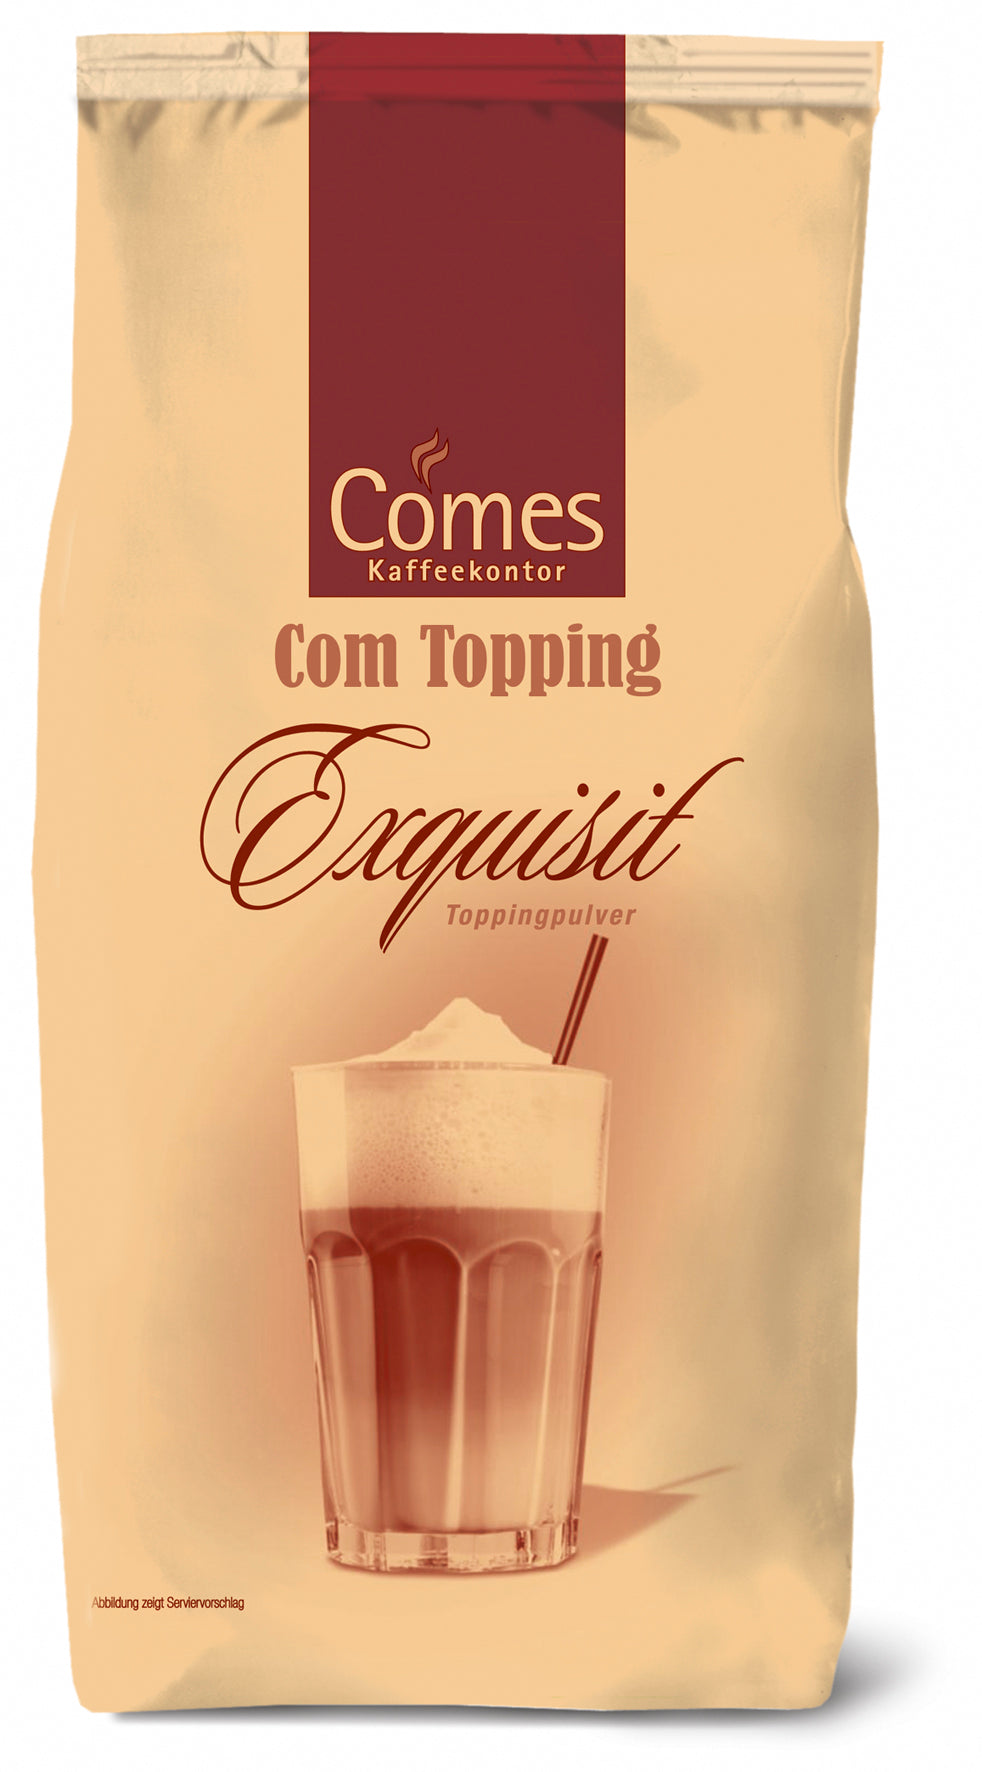 Com Topping Exquisit